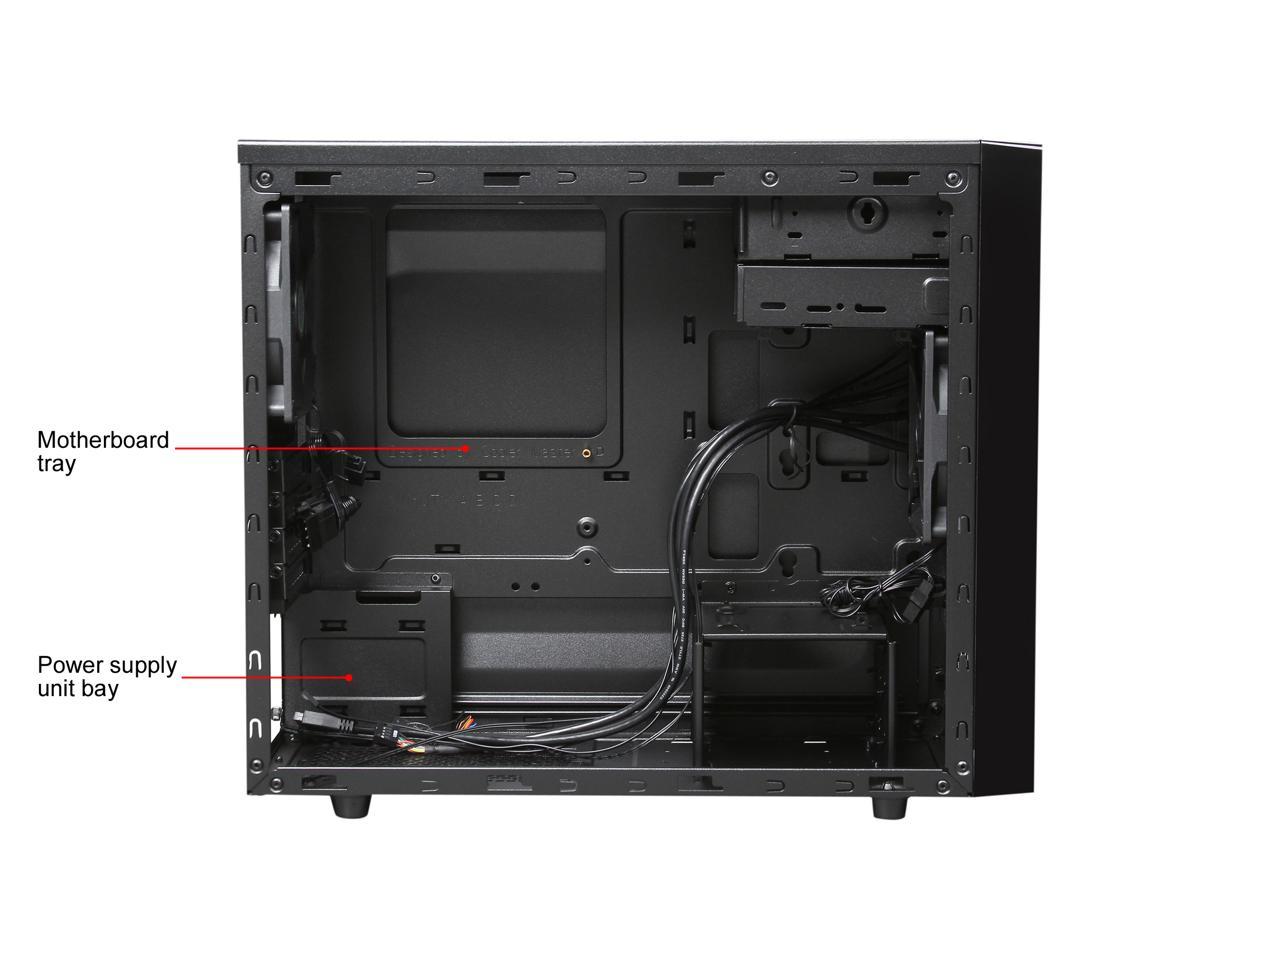 cooler-master-n200-micro-atx-mini-tower-computer-case-with-front